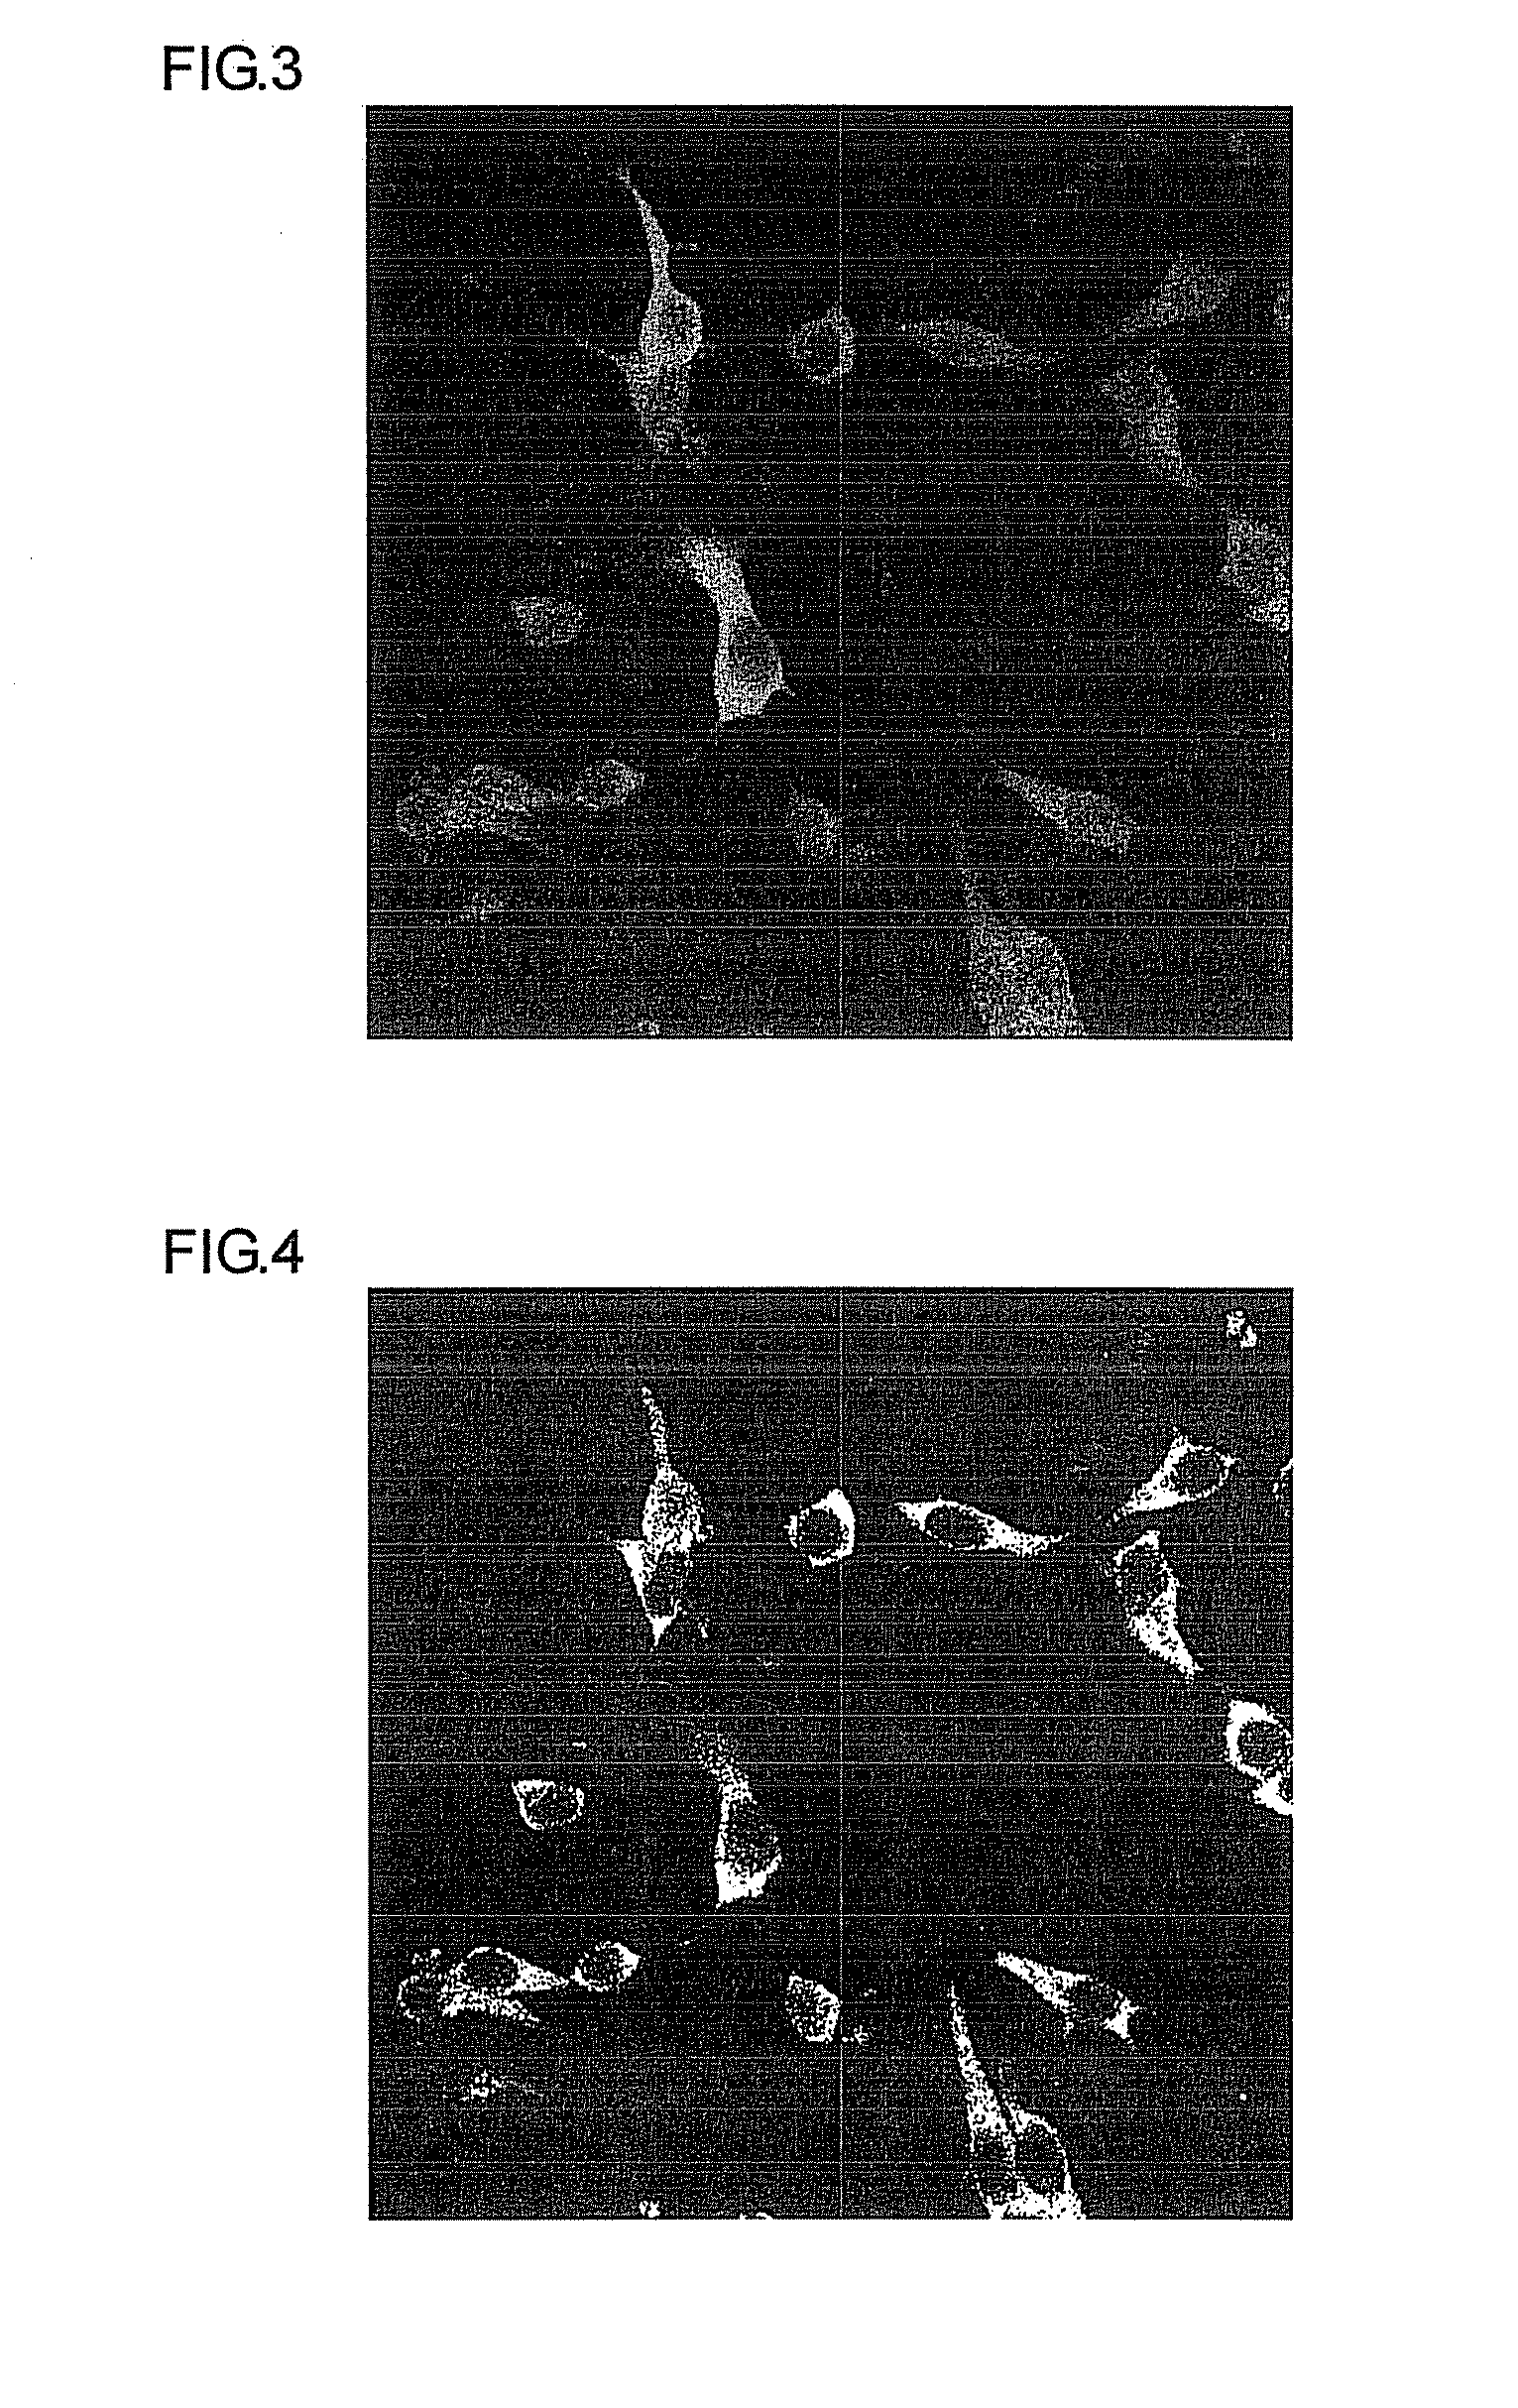 Neuronal differentiation-inducing peptide and use thereof